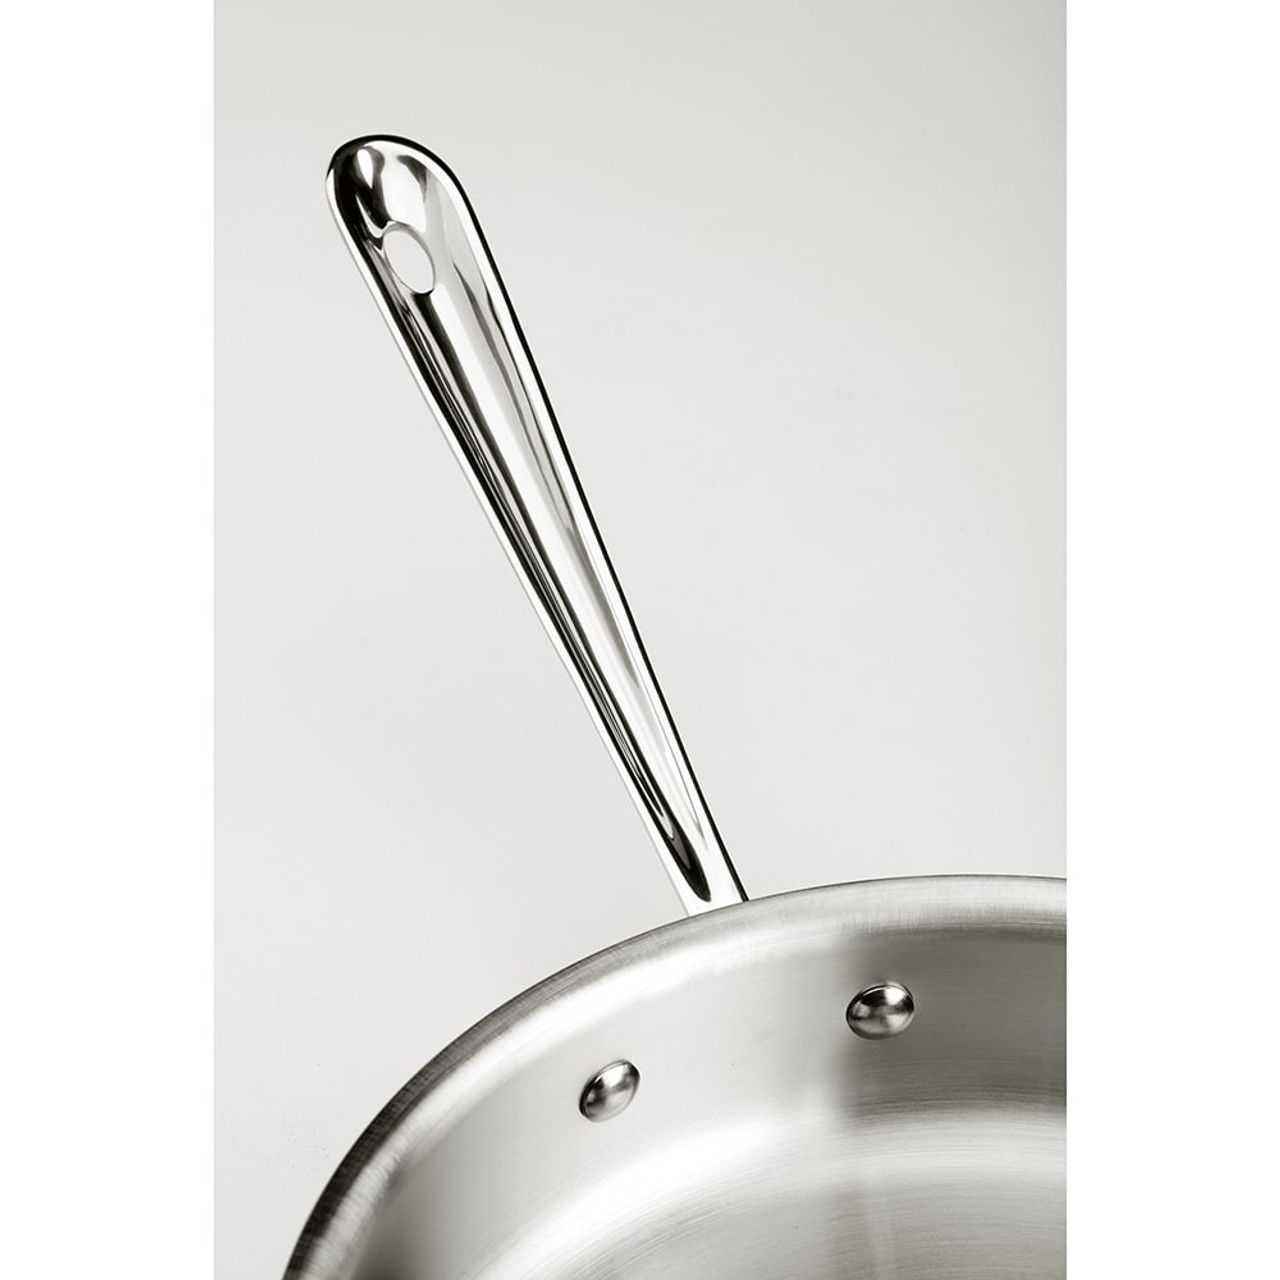 All-Clad D3 3-Ply 10 and 12 inch Fry pan Set with lids